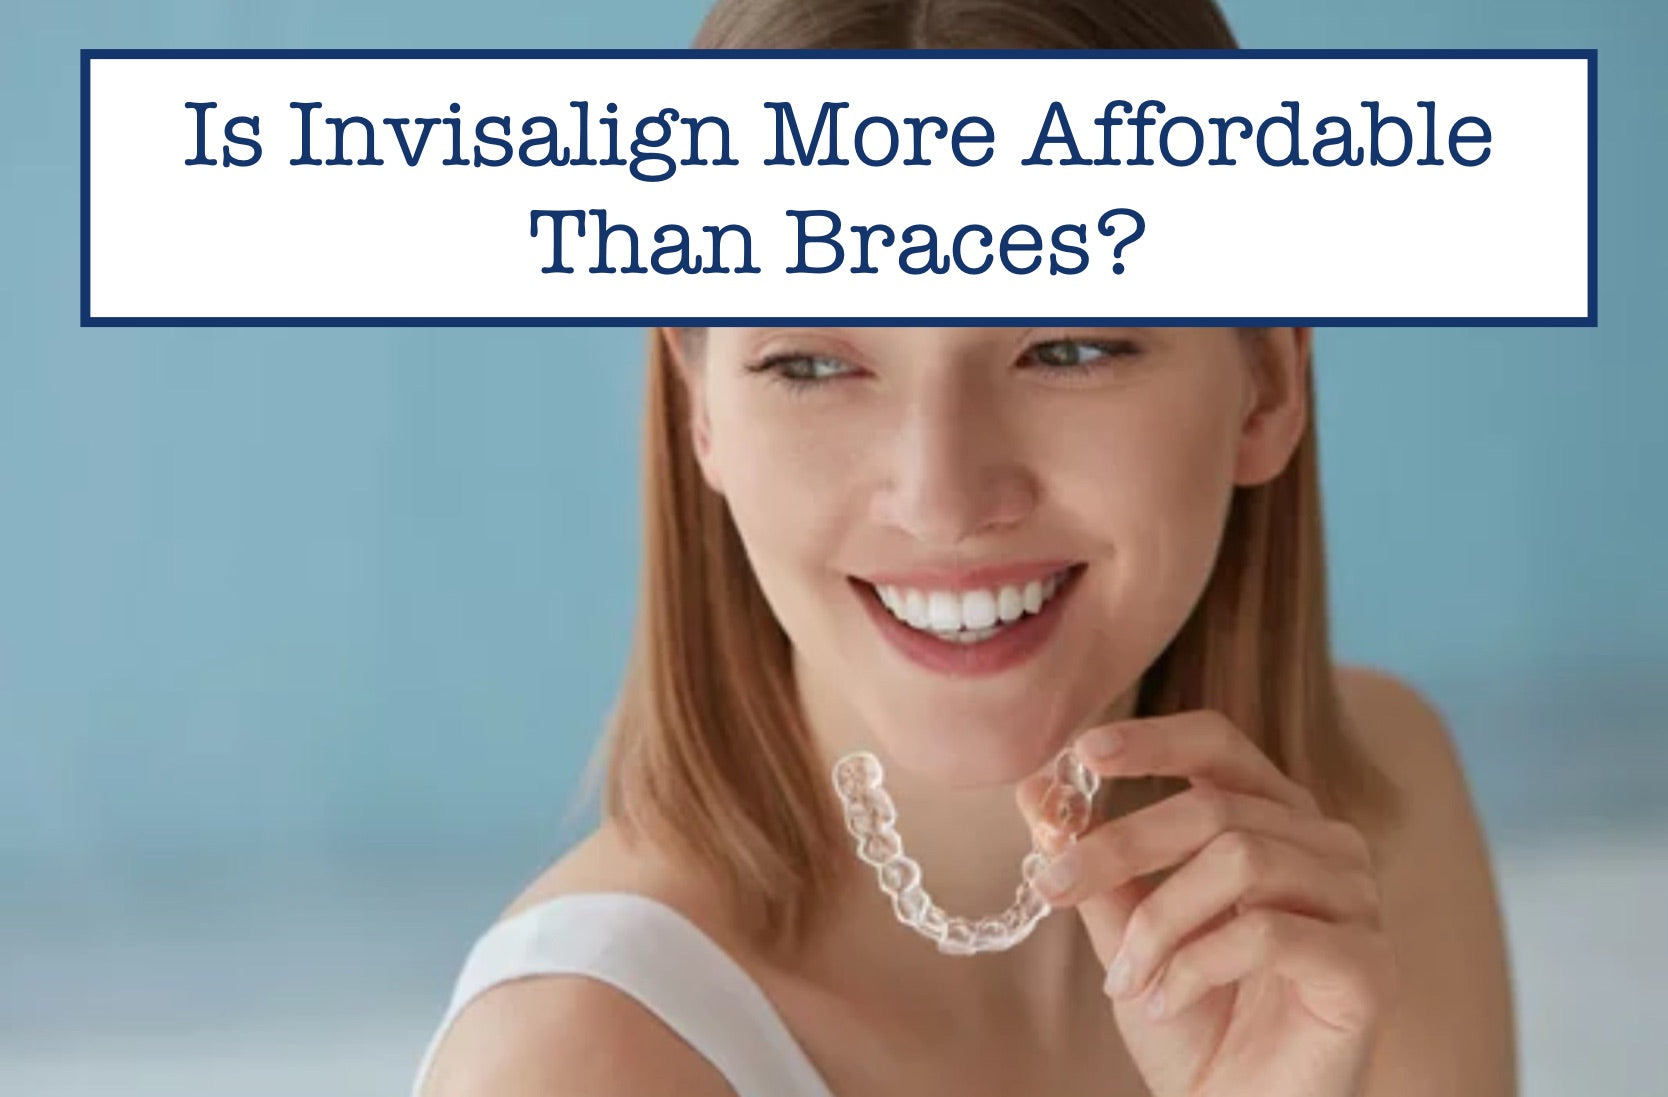 Is Invisalign More Affordable Than Braces?